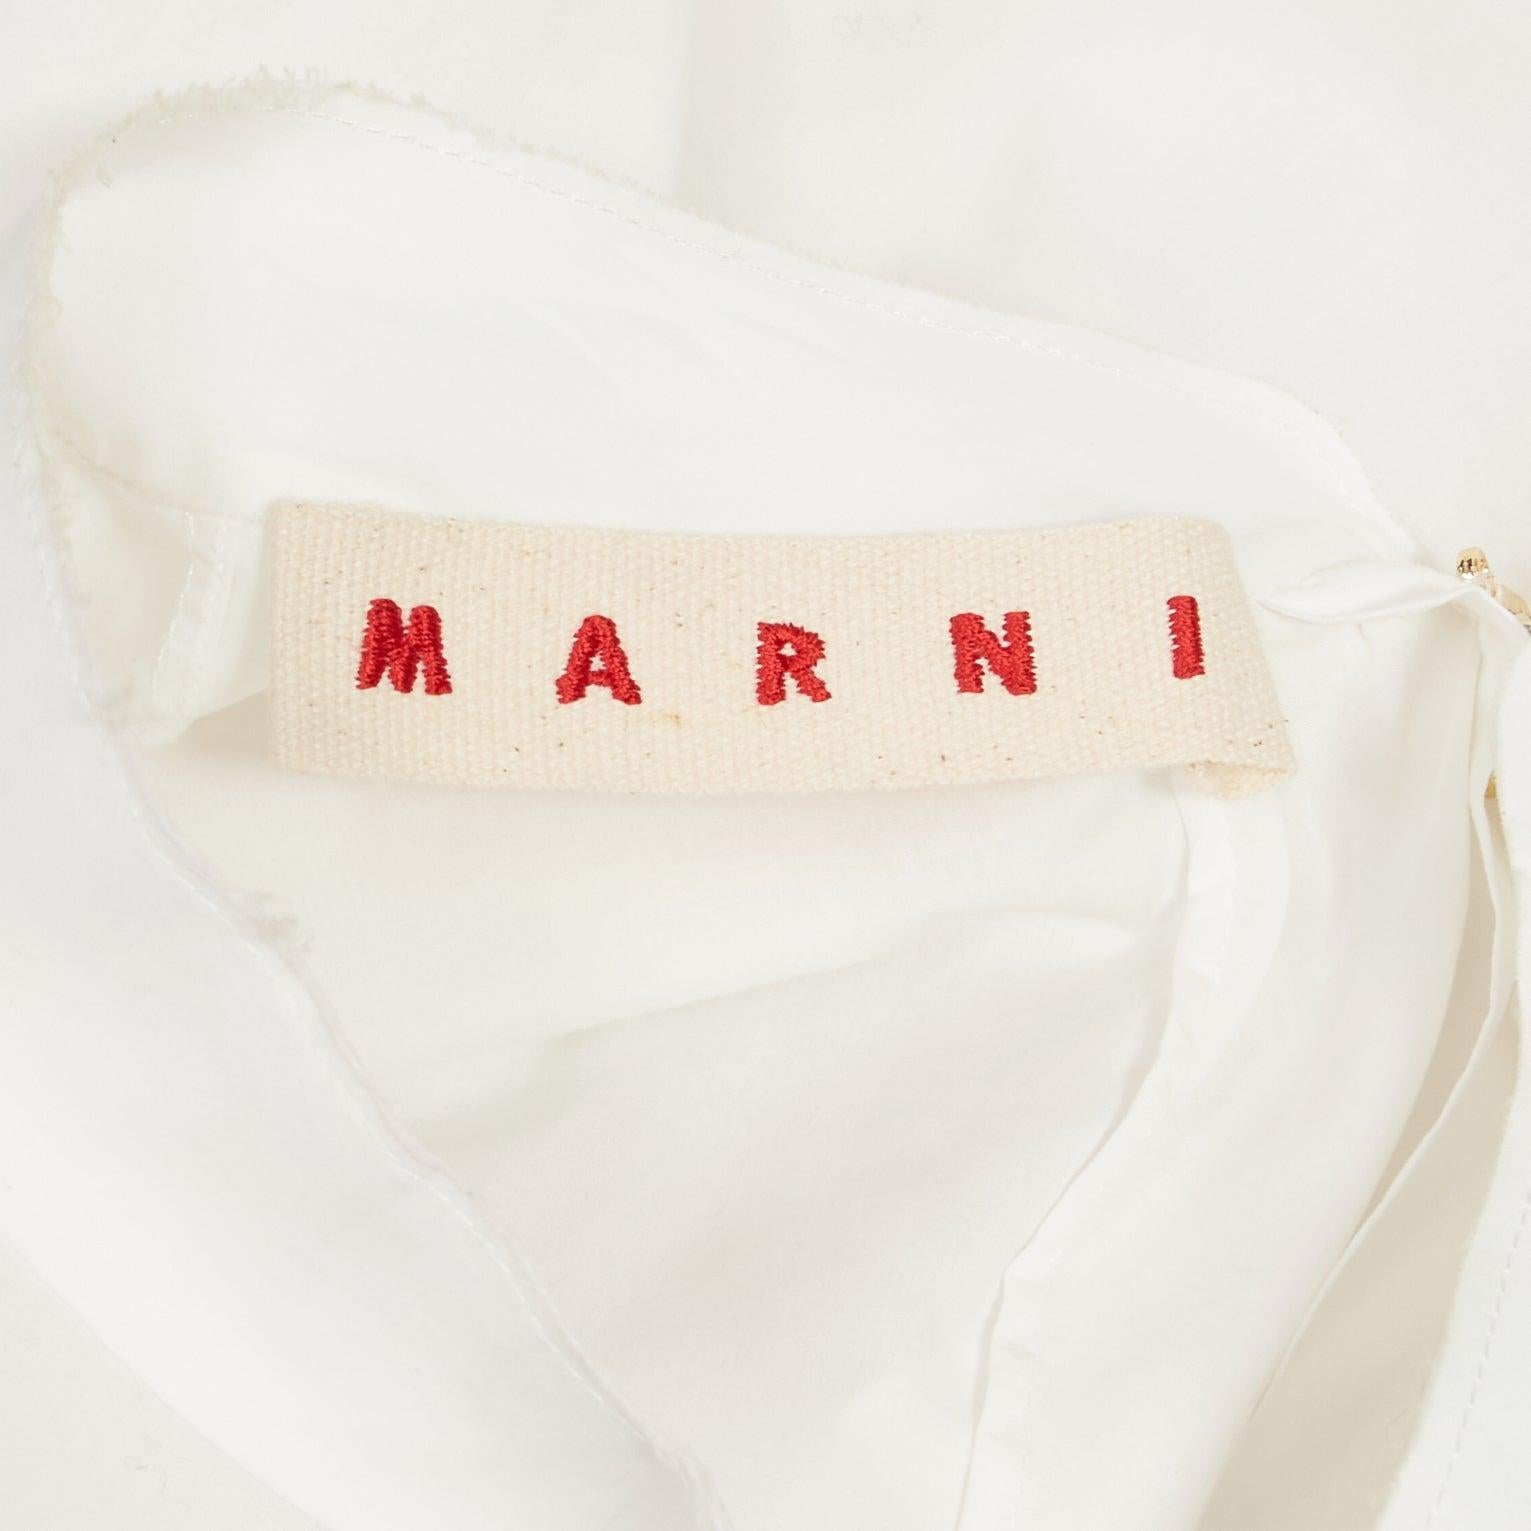 MARNI white cotton minimal front gold hook back panelled white shirt For Sale 5